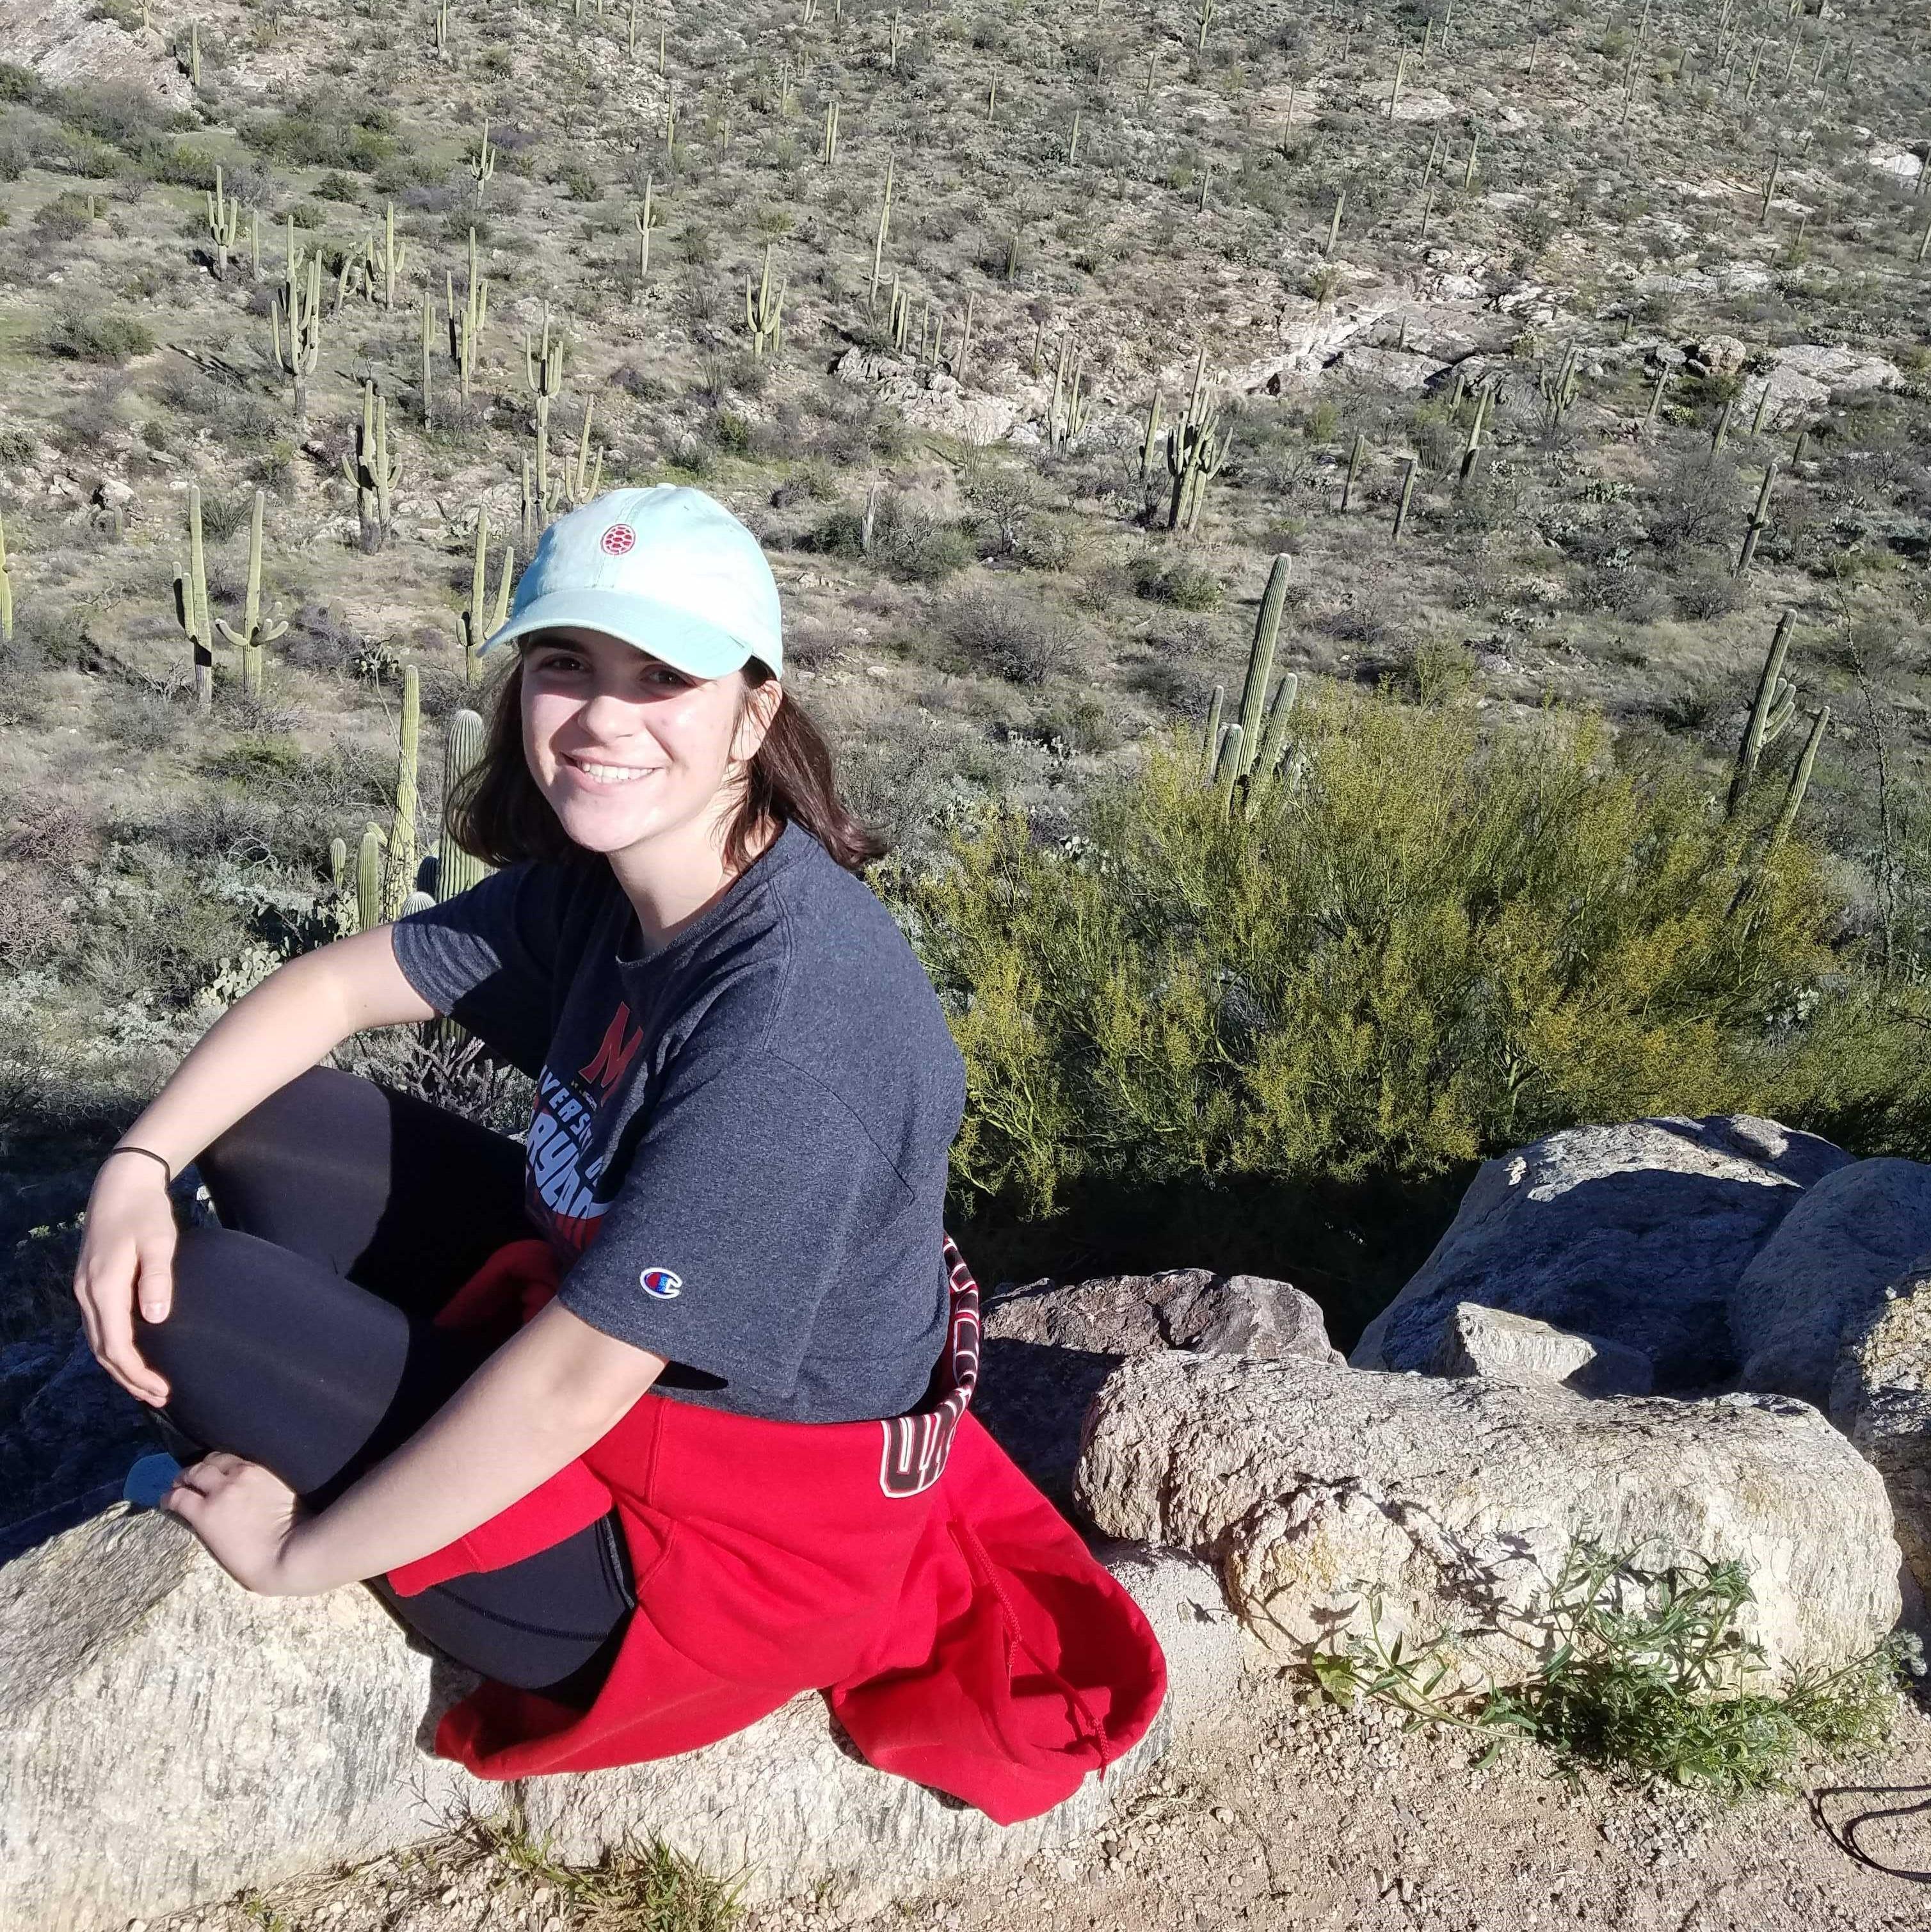 Cameron Smith smiles, sitting on rocks with a field of cacti behind her.